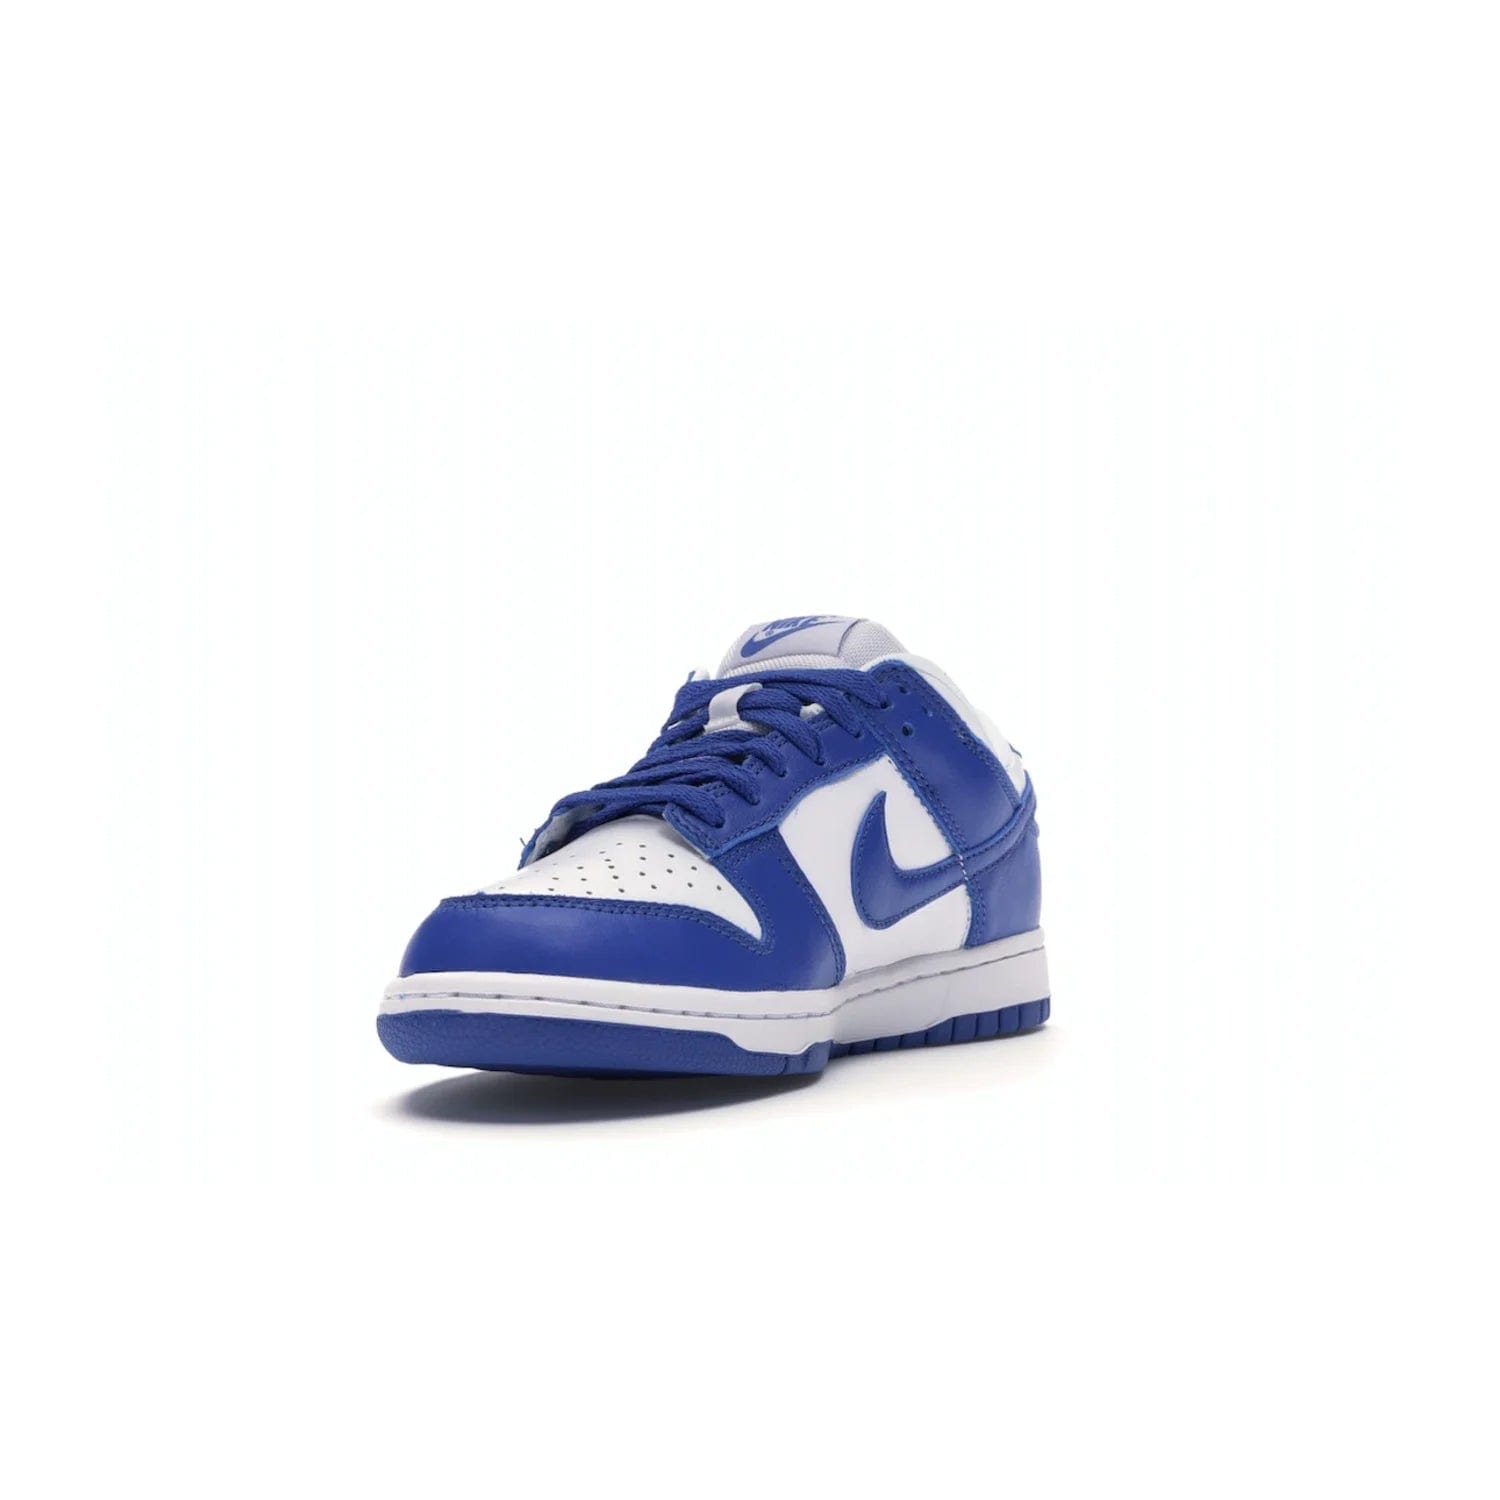 Nike Dunk Low SP Kentucky (2020/2022) - Image 13 - Only at www.BallersClubKickz.com - Classic Nike Dunk Low SP Kentucky with timeless White/Varsity Royal colorway. White leather upper, royal outsole, and Nike branding. A hit since March 2020 homage to the 1985 Nike College Colors program. Show your support with these classic kicks.